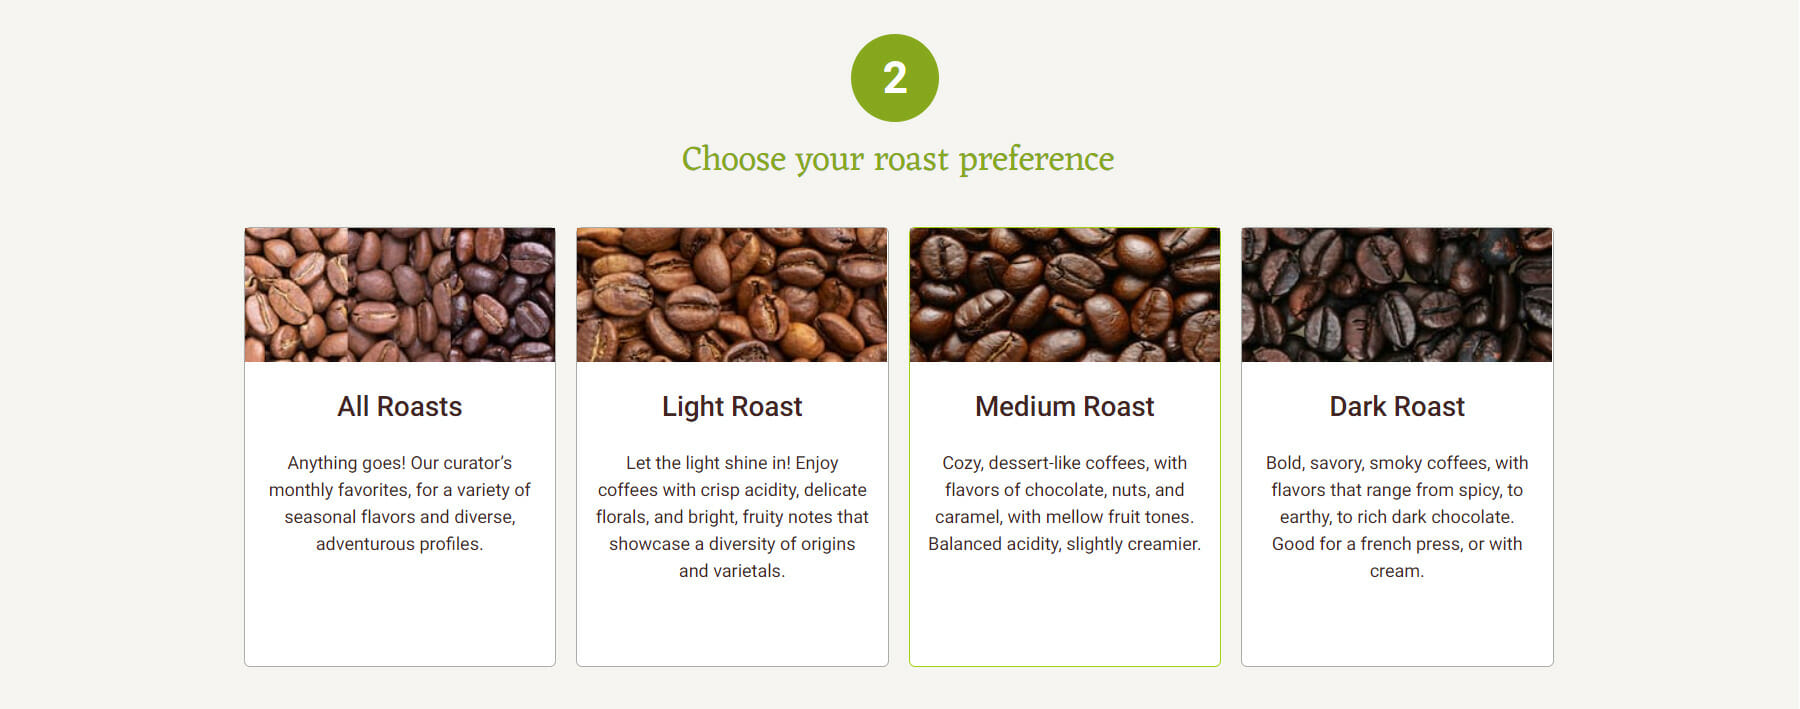 Know Your Roast Preference